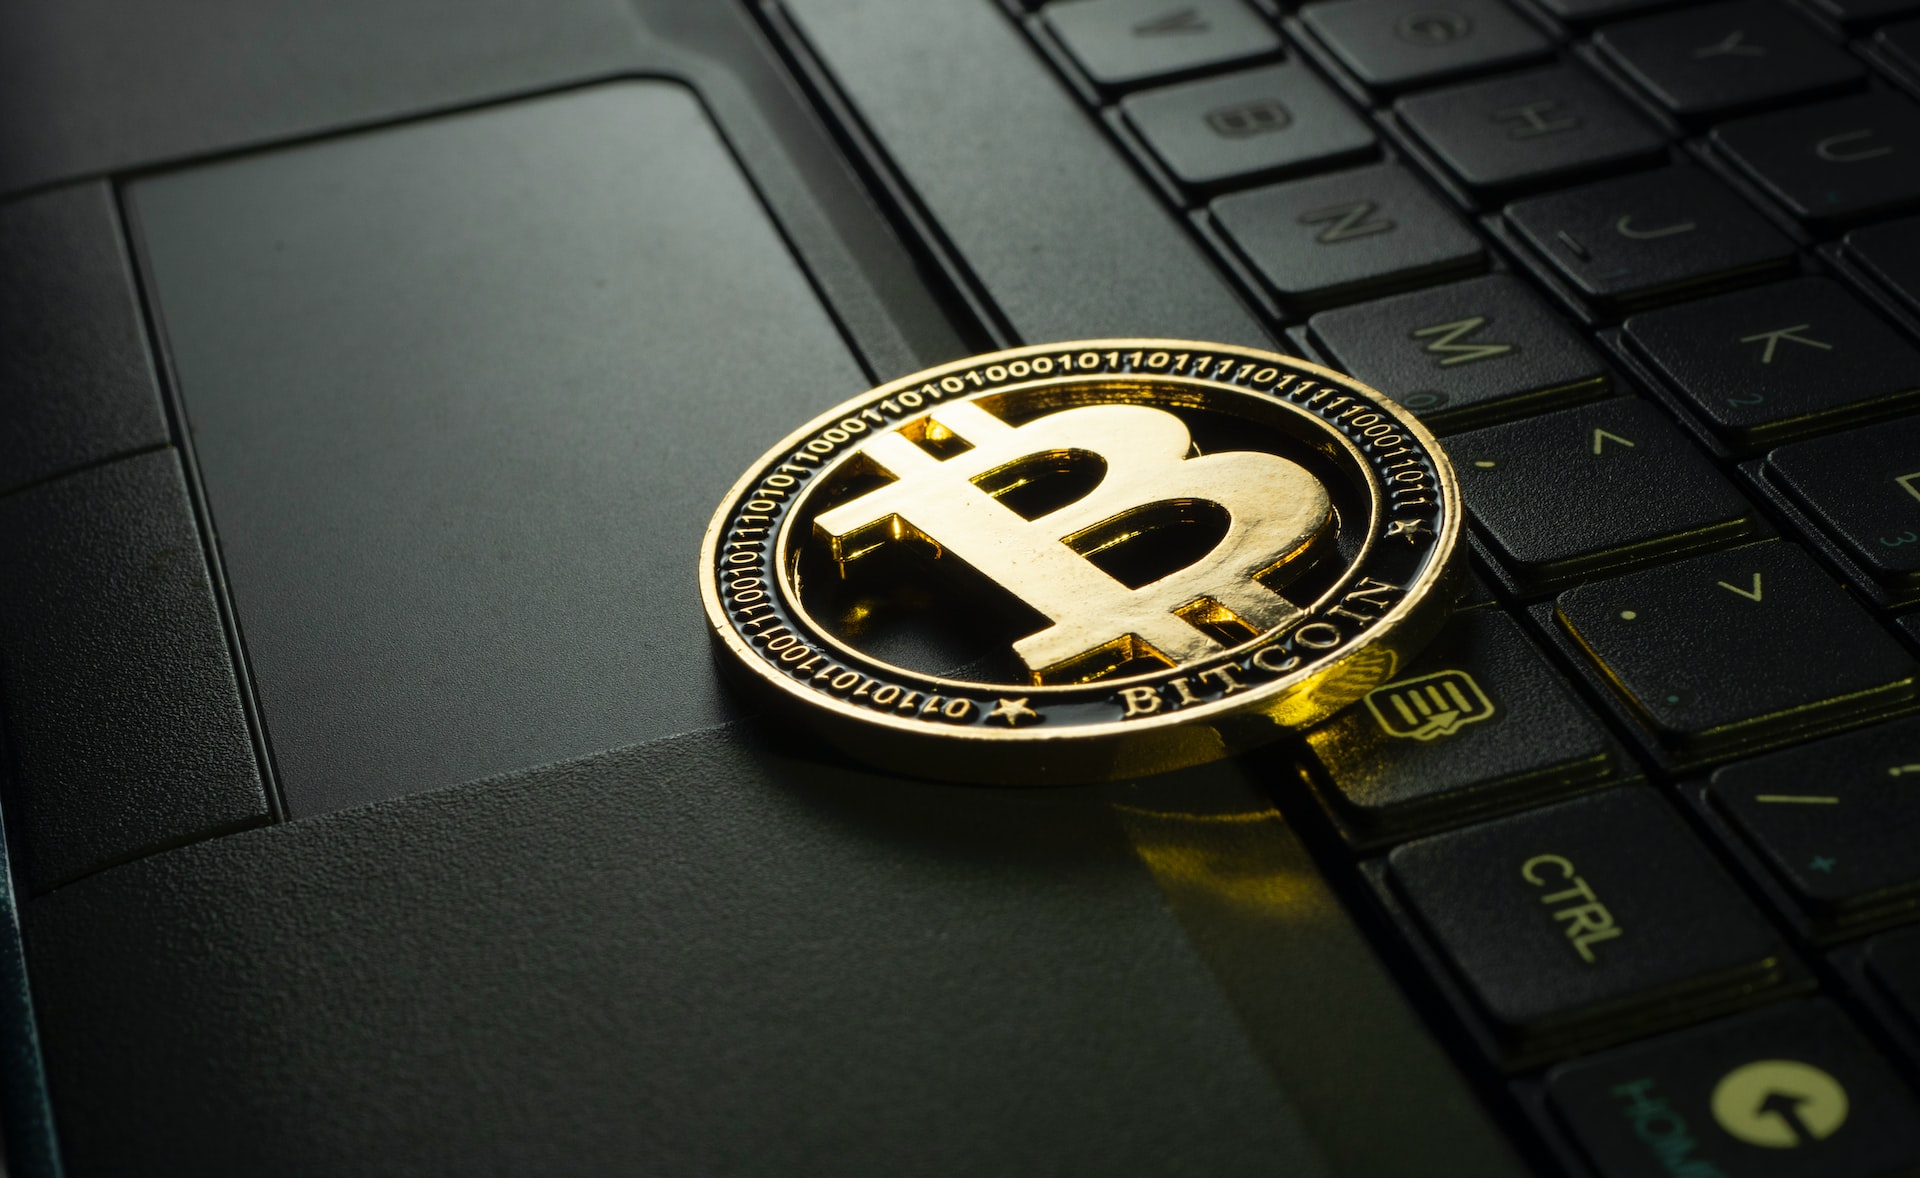 According to Bullish crypto investor Ronnie Moas, the price of Bitcoin (BTC) will reach $84,000 in 2023 as the cryptocurrency market regains losses.